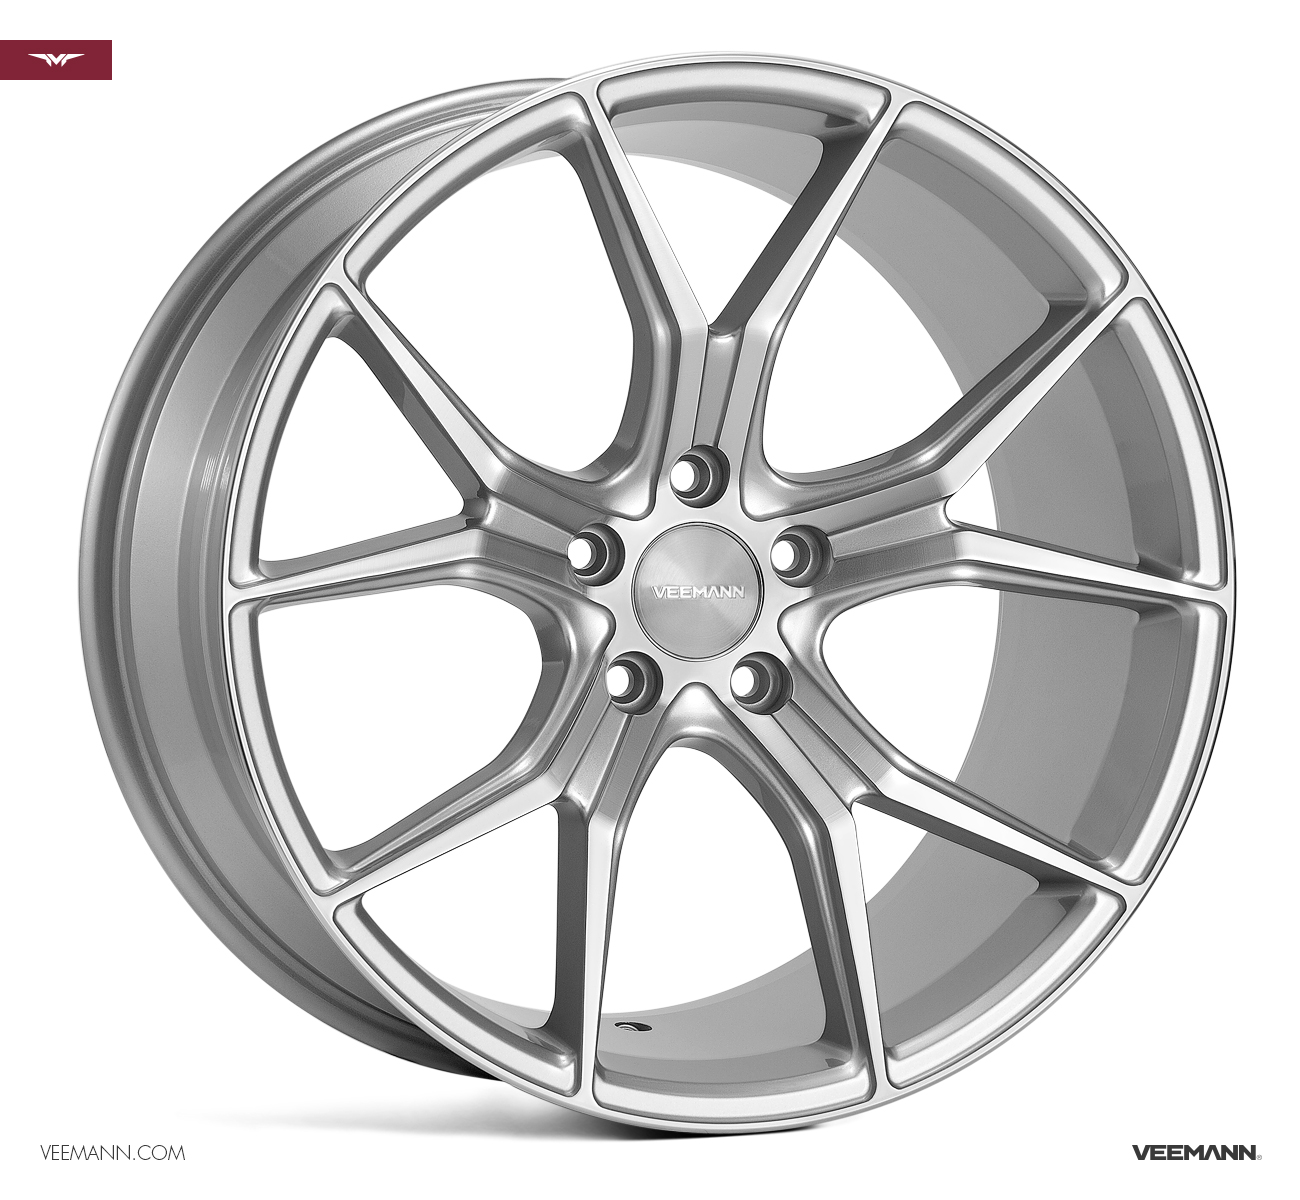 NEW 19" VEEMANN V-FS20 CONCAVE ALLOY WHEELS IN SILVER WITH POLISHED FACE, WIDER 9.5" REAR et 42/40